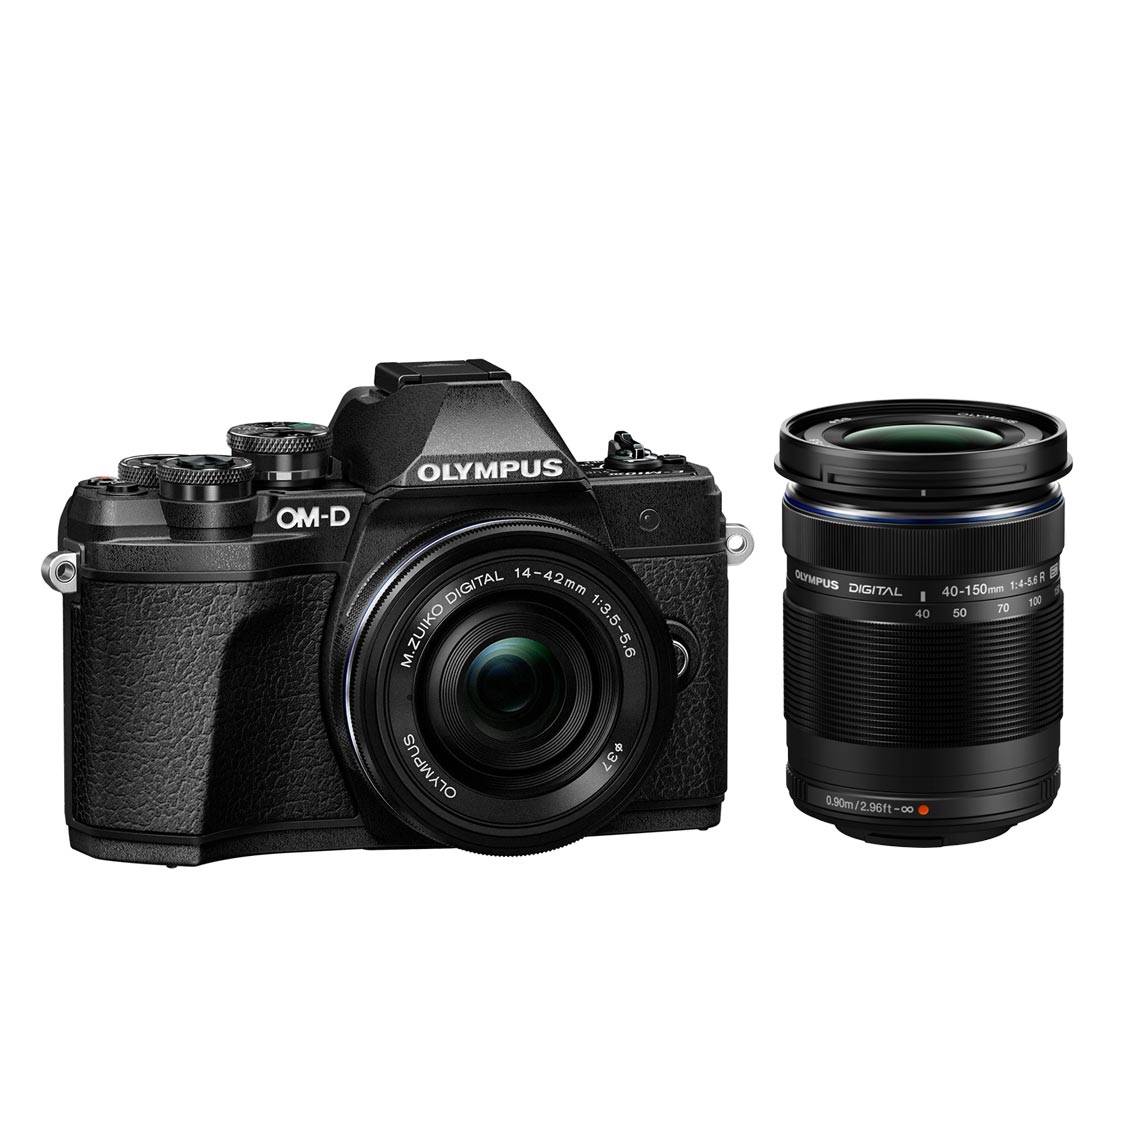 Olympus E-M10 Mark III Camera (black) with 14-42mm EZ and 40-150mm Lenses